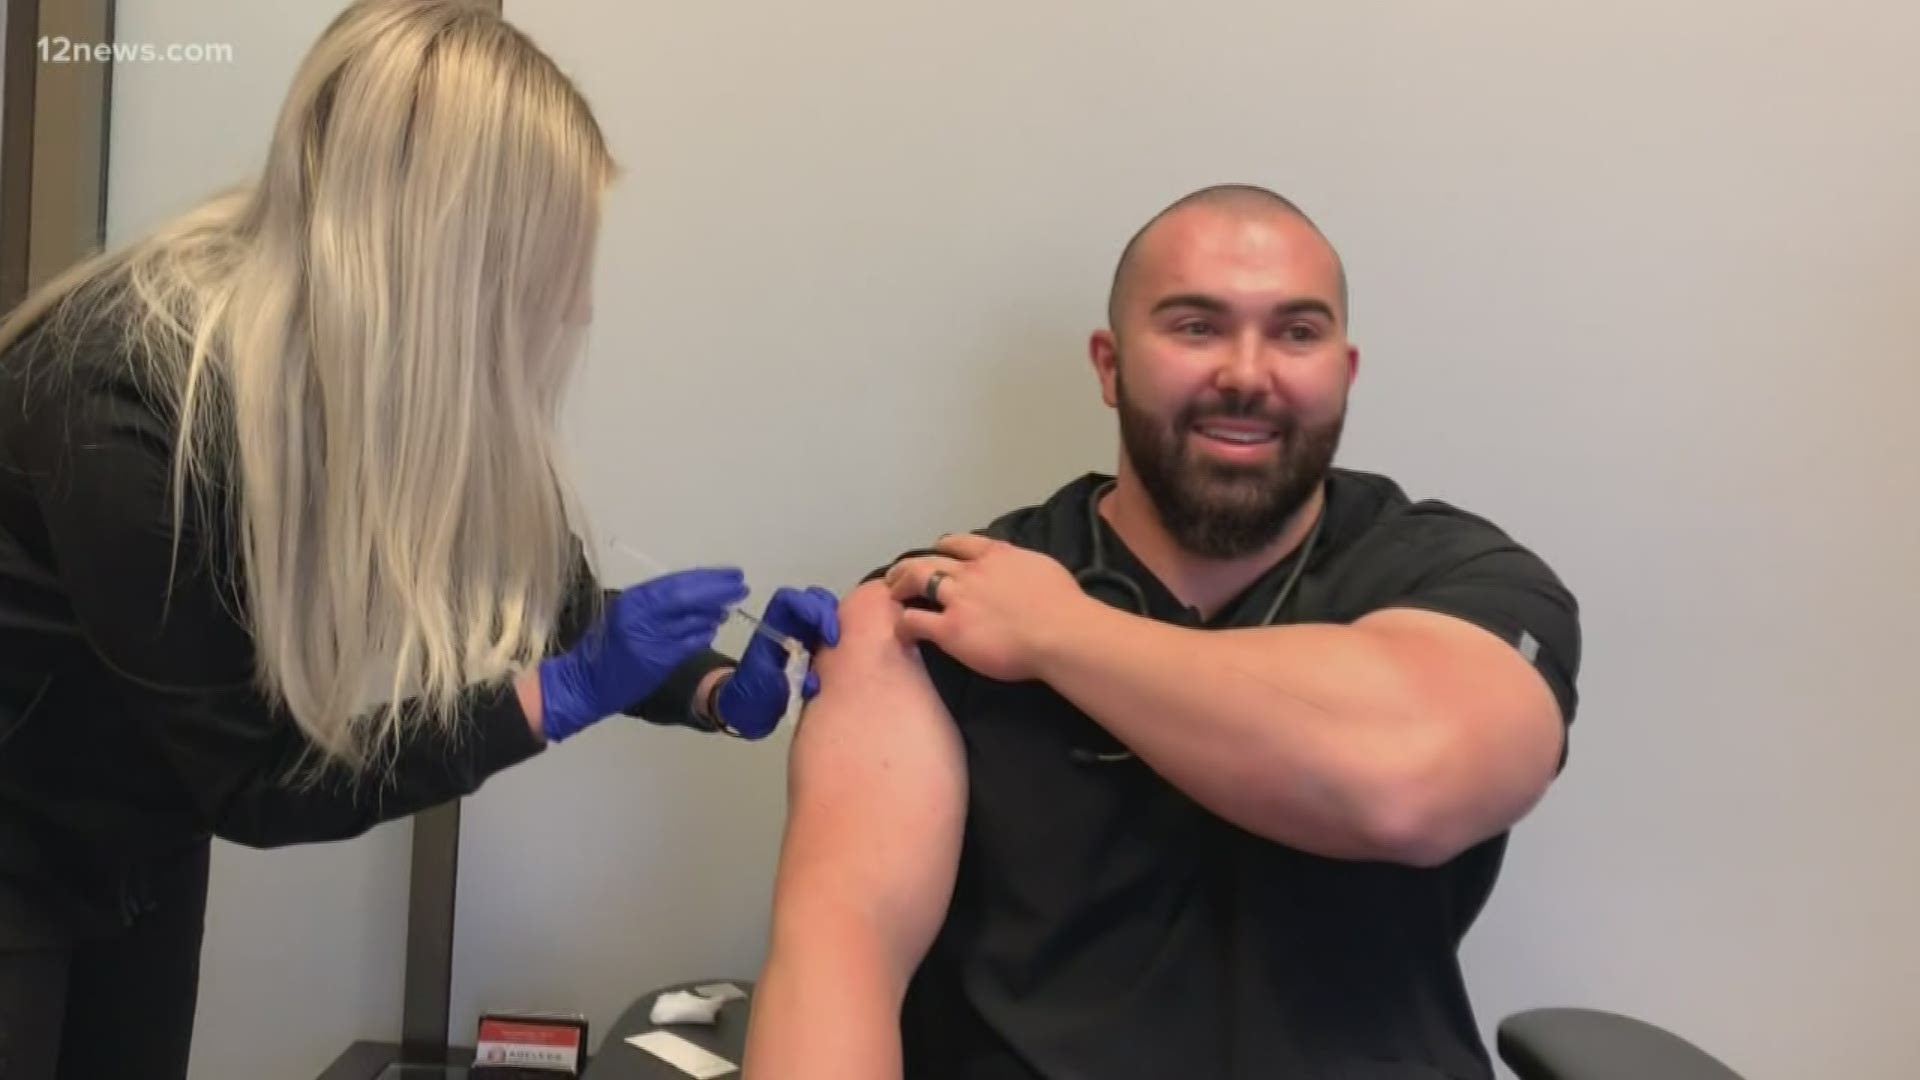 Ageless Men's Health clinic in Phoenix is giving a free immune-boosting shot to first responders. It helps strengthen the immune system.